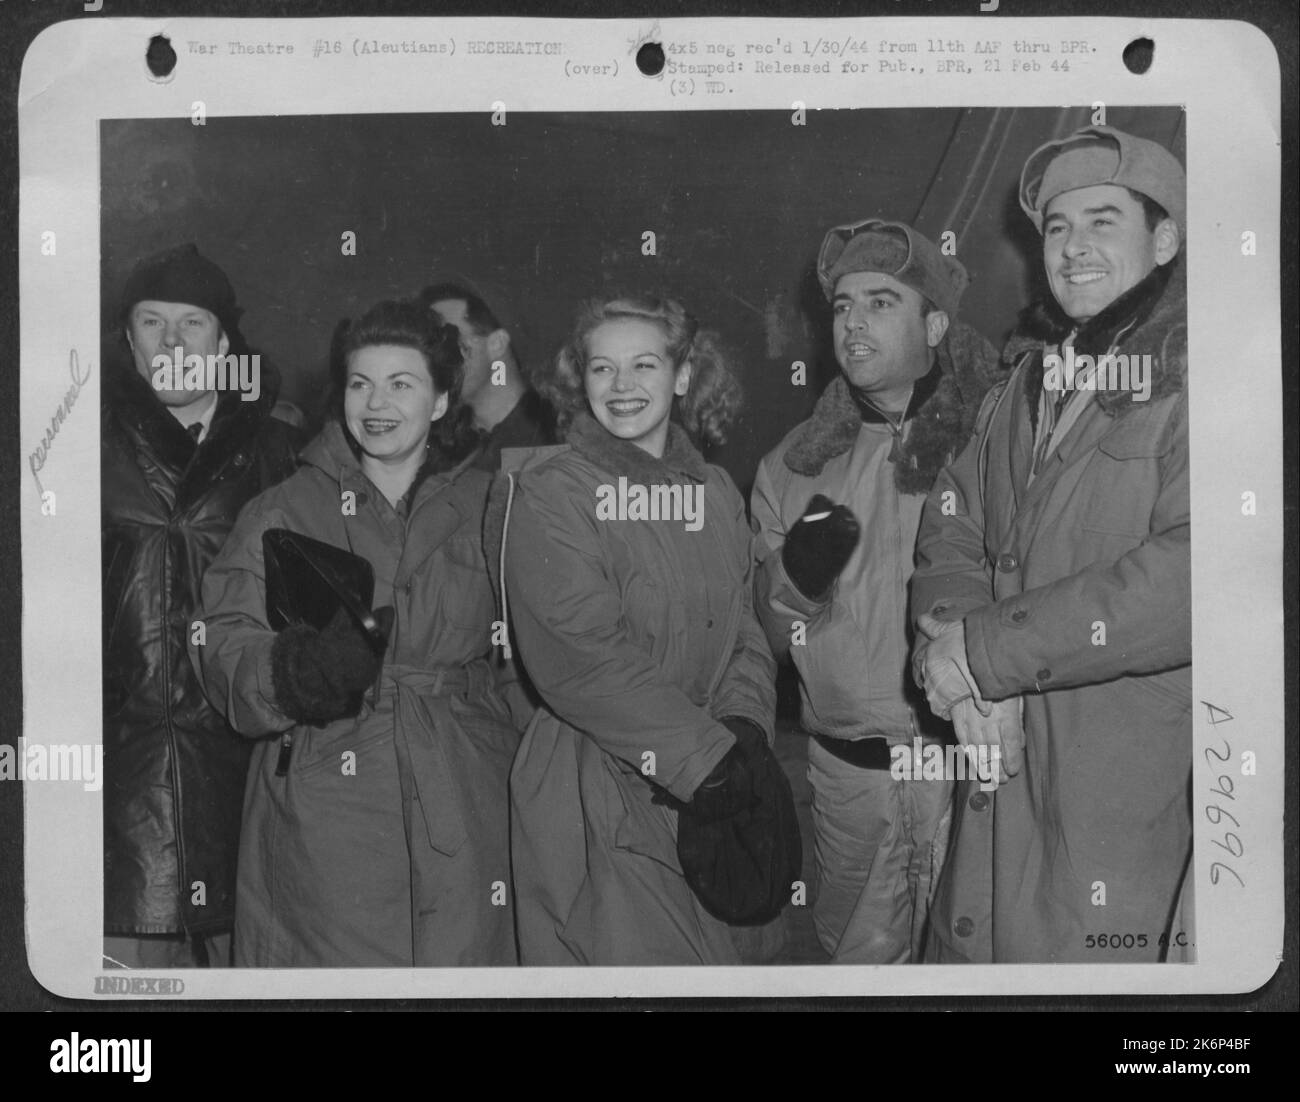 The reason for these heavy coats is that this troupe of entertainers, fresh from Hollywood, are at Amchitka Island, in the cold bleak Aleutians. They were snapped by an AAF photographer shortly after they arrived in an army air transport plane to Stock Photo